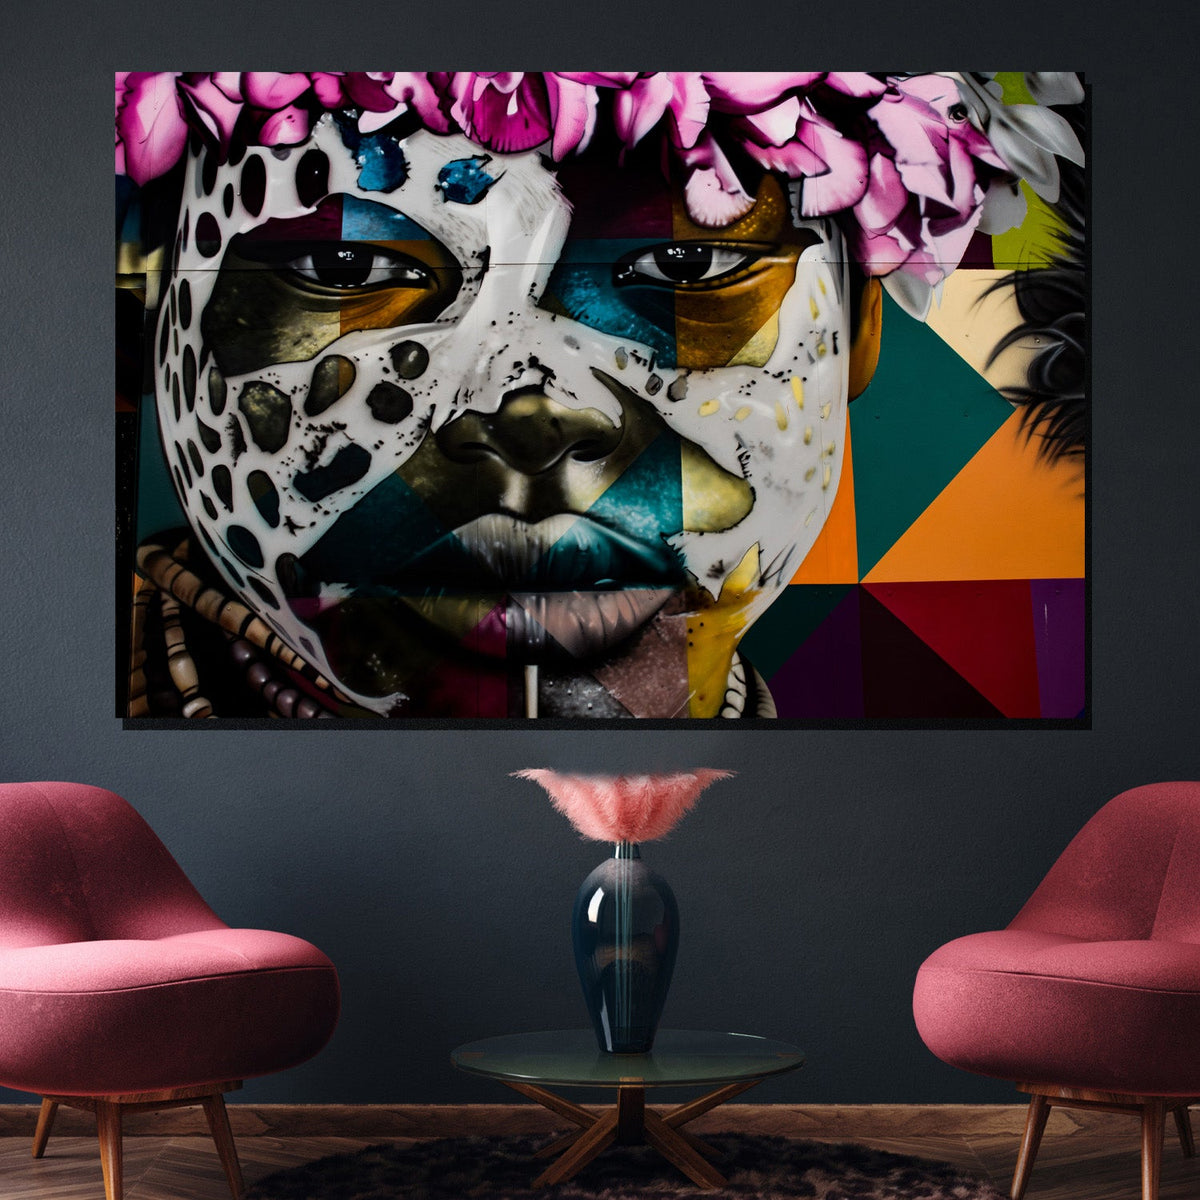 https://cdn.shopify.com/s/files/1/0387/9986/8044/products/AfricanBoyCanvasArtPrintStretched-1.jpg